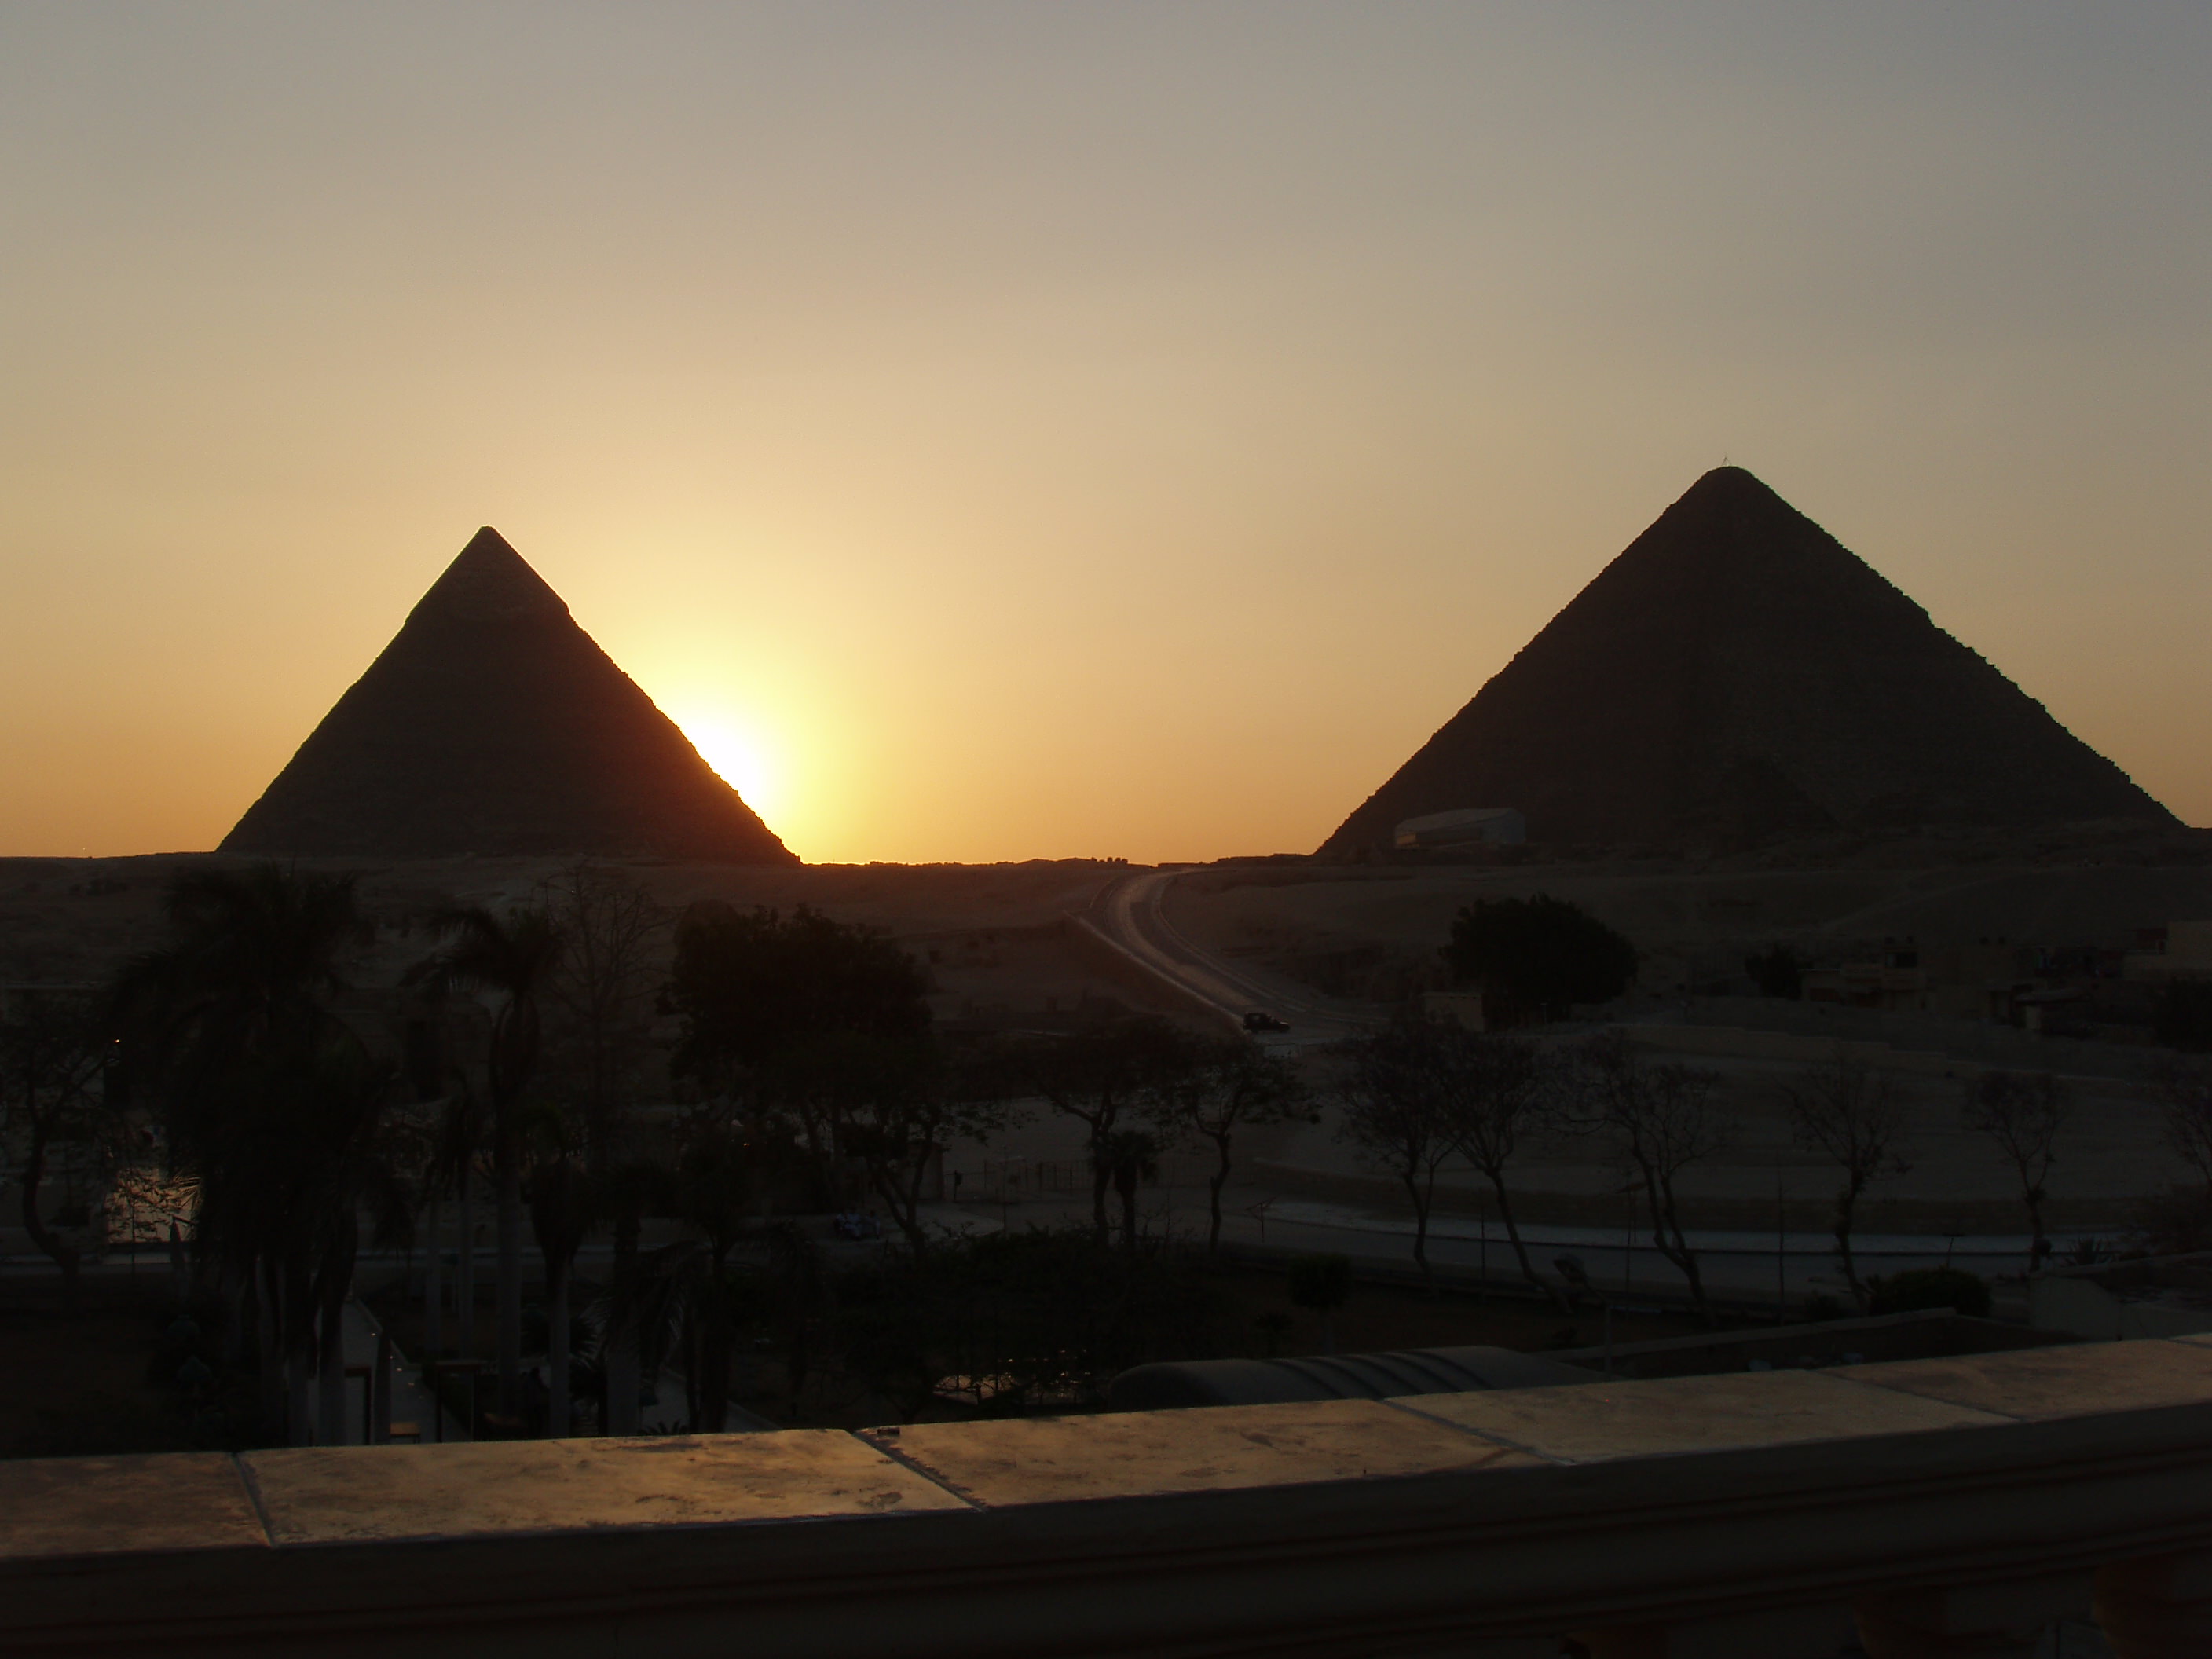 Sunset view of Pyramids - Egypt